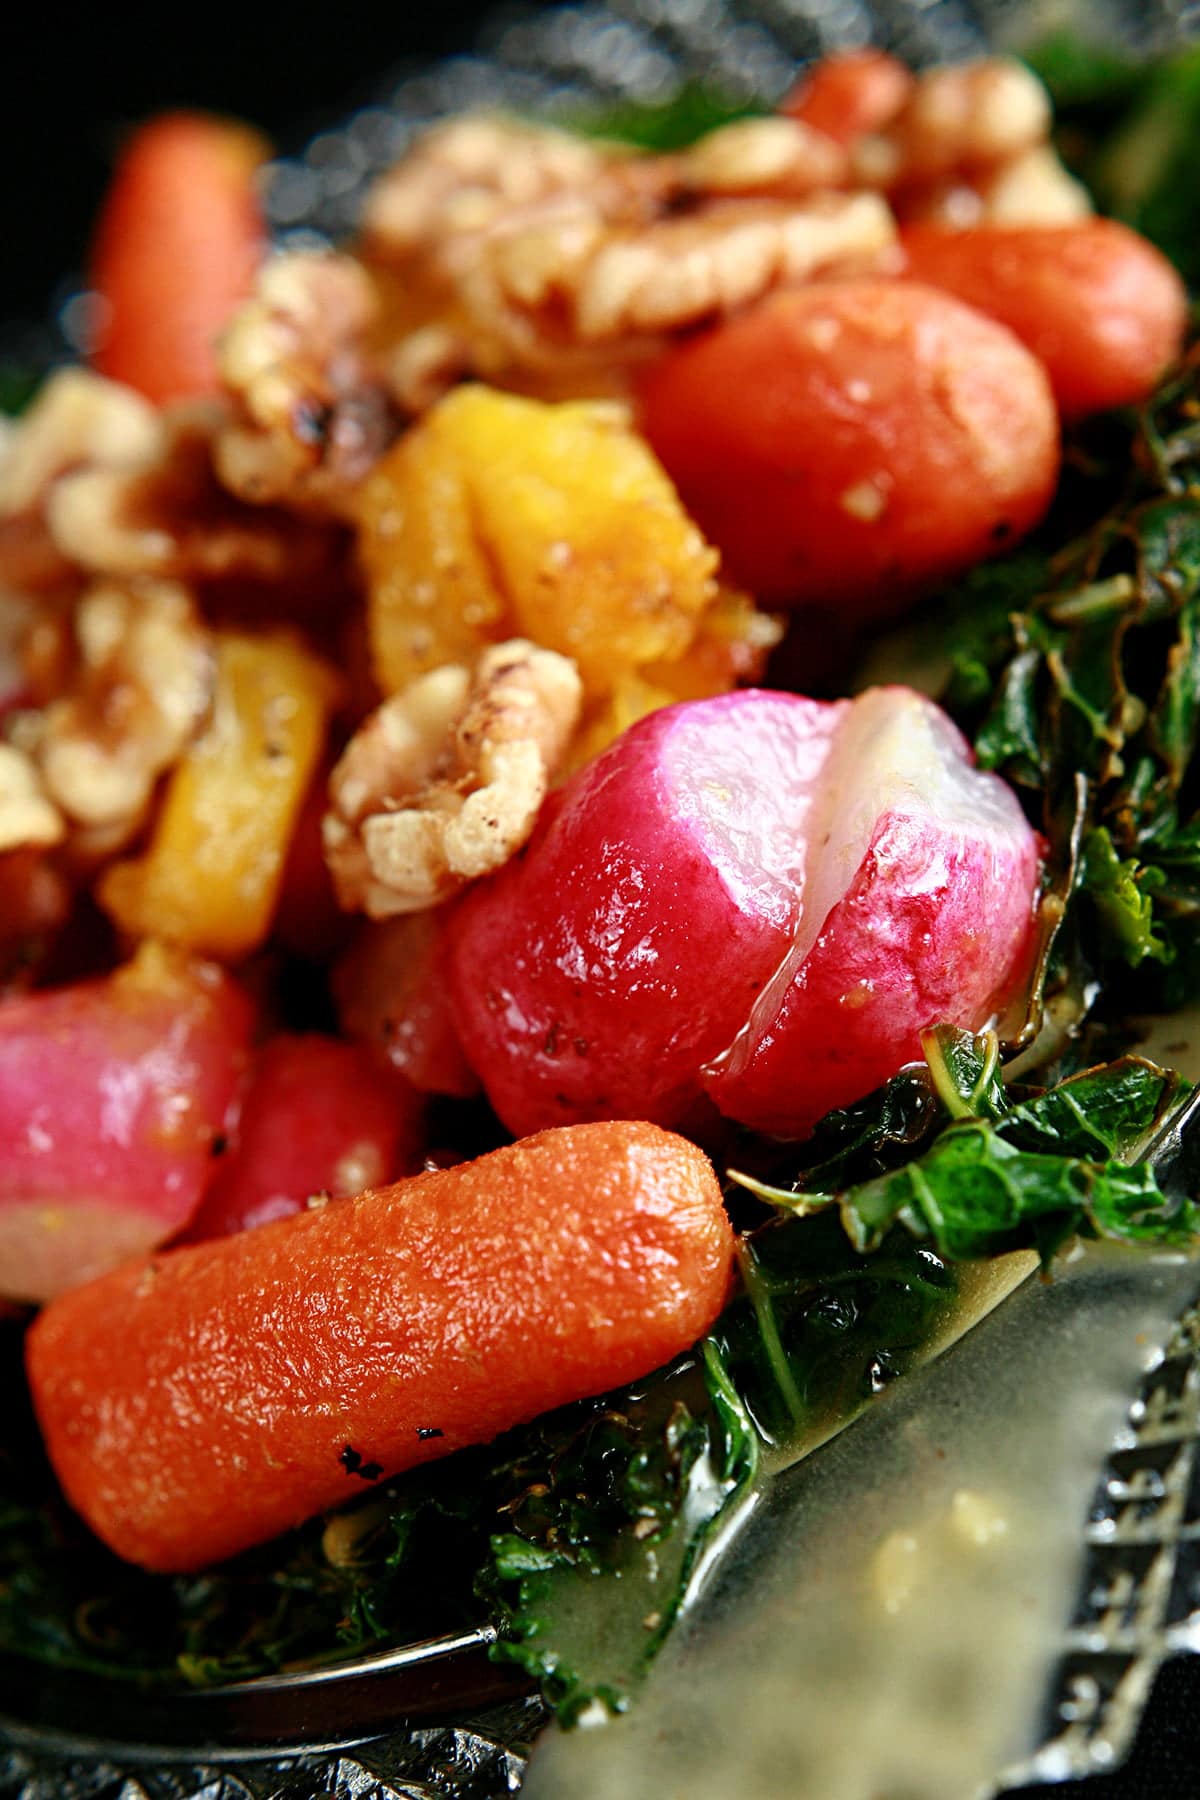 Roasted Radish Salad on a glass plate. Roasted radishes, baby carrots, and squash are served on a base of crispy kale, and topped with a dijon vinaigrette and walnuts.